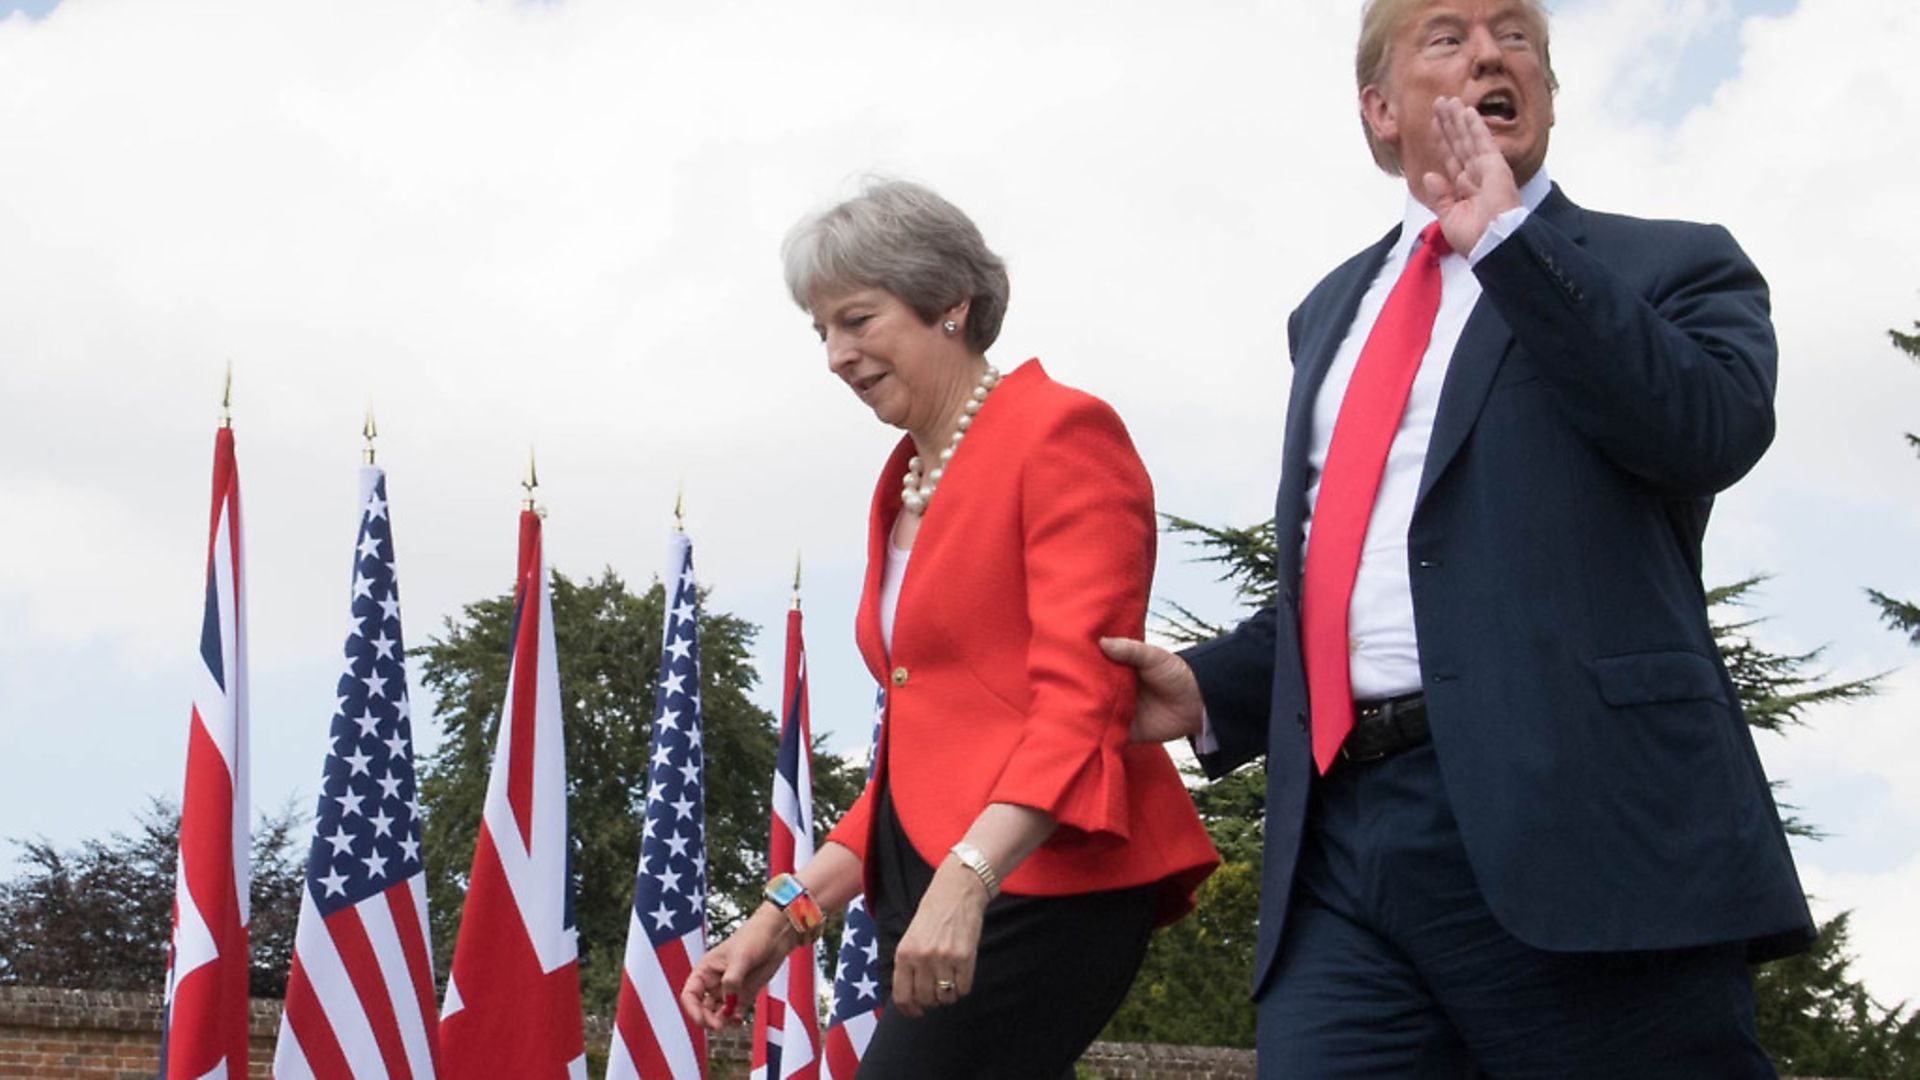 US president Donald Trump walks with prime minister Theresa May prior to a joint press conference at Chequers in Buckinghamshire. Photograph: Stefan Rousseau/PA. - Credit: PA Wire/PA Images